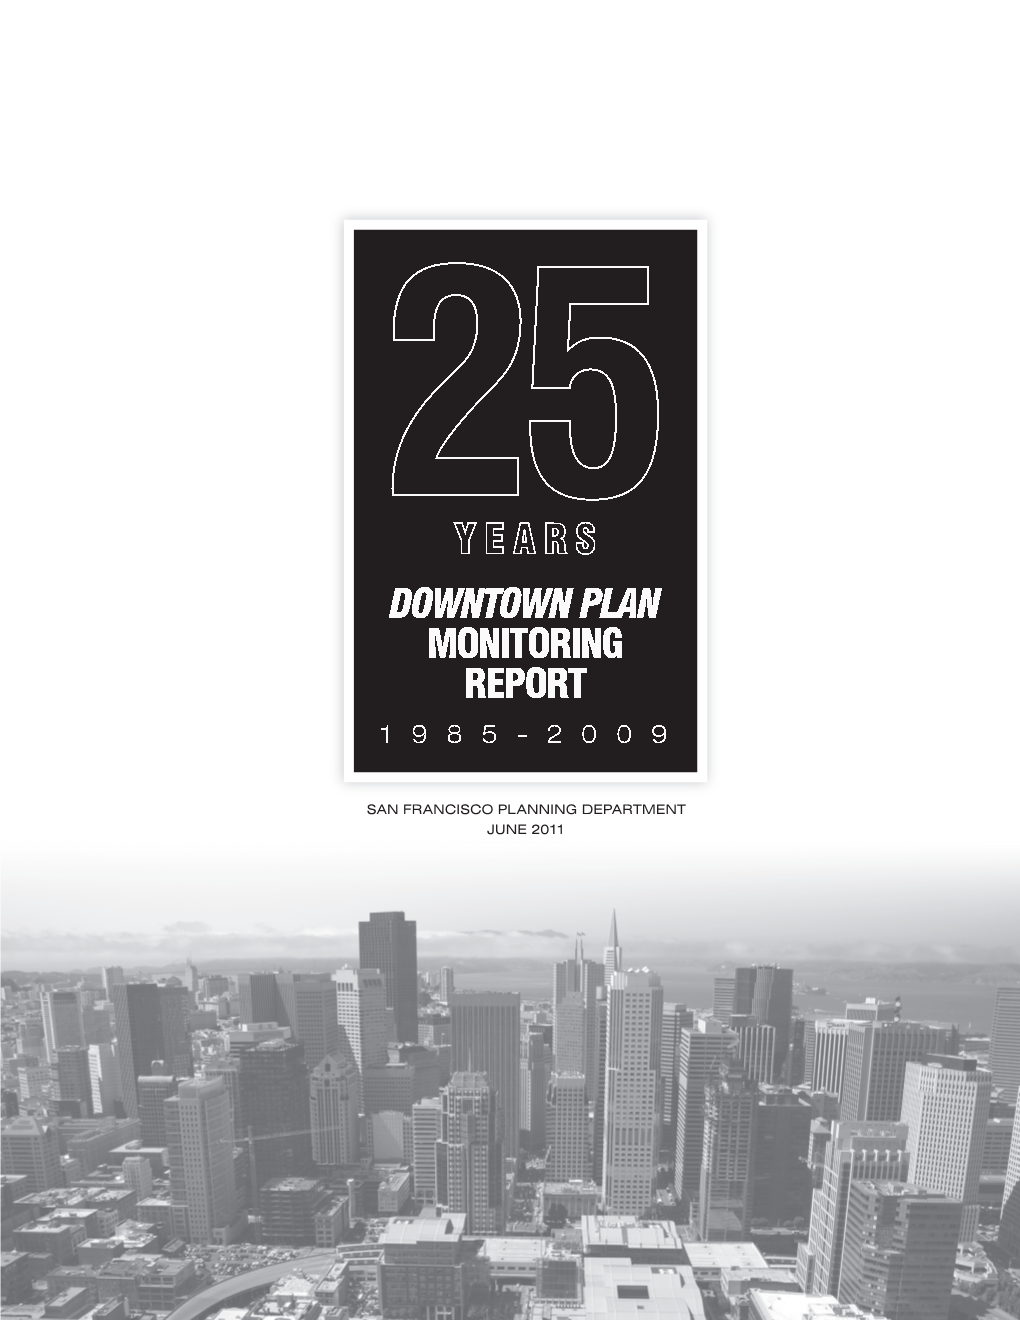 25 Years: Downtown Plan Monitoring Report 1985-2009